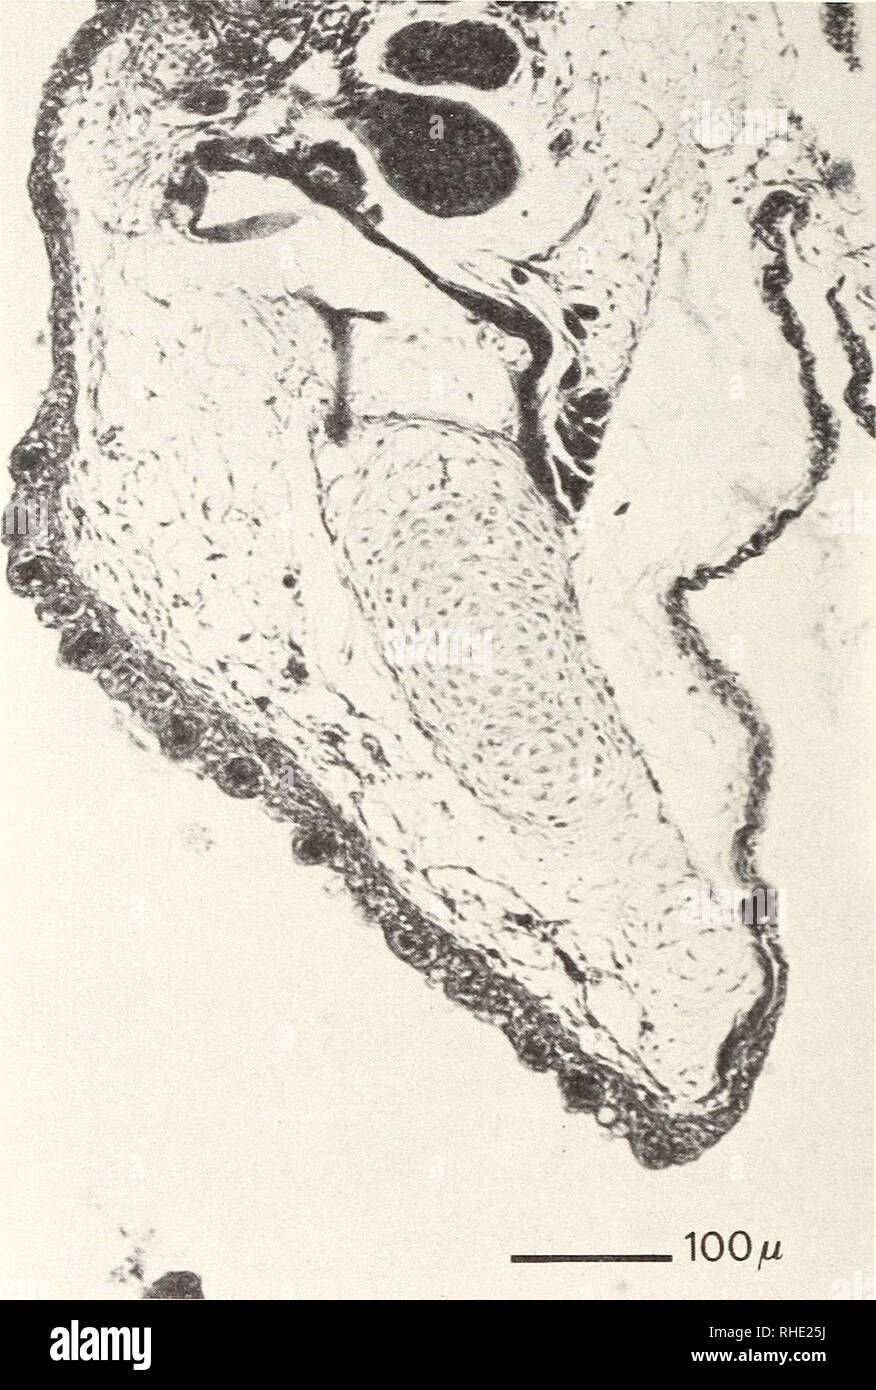 . Bonner zoologische Monographien. Zoology. 38 Generally, the pharynx is rich in taste buds, and the mucous dorsal epithel contains secretory cells (hardly staining in Masson's trichrome) (Fig. 5).. Fig. 5. Apistogramma cacatuoides, 23.7 mm. Lateral view of sagittal section of head, showing lobe (Masson's Trichrome, 10 m). In Pelvicachromis tceniatus (Fig. 4) there is no middle region of unspecialized epithel, but the mucous epithel extends anteriorly to the margin of the folded buccal epithel. However, over the attachment of the second gill-arch the mucous epithel area is considerably thicken Stock Photo